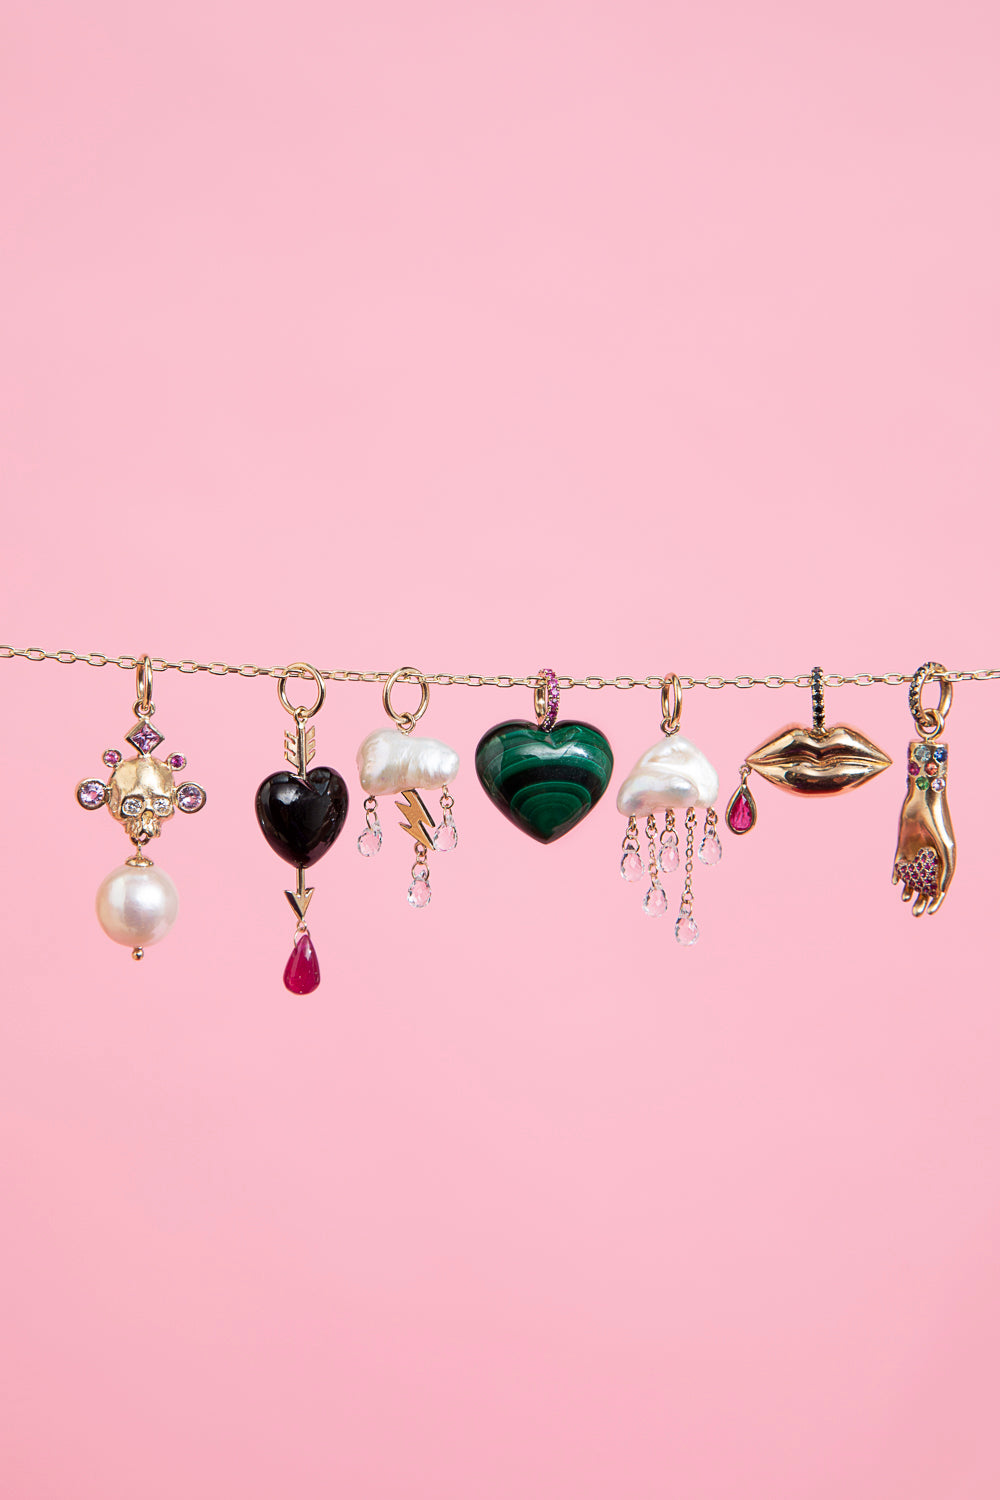 7 Rachel Quinn Jewelry Charms hanging horizontally across a chain on a pink background.